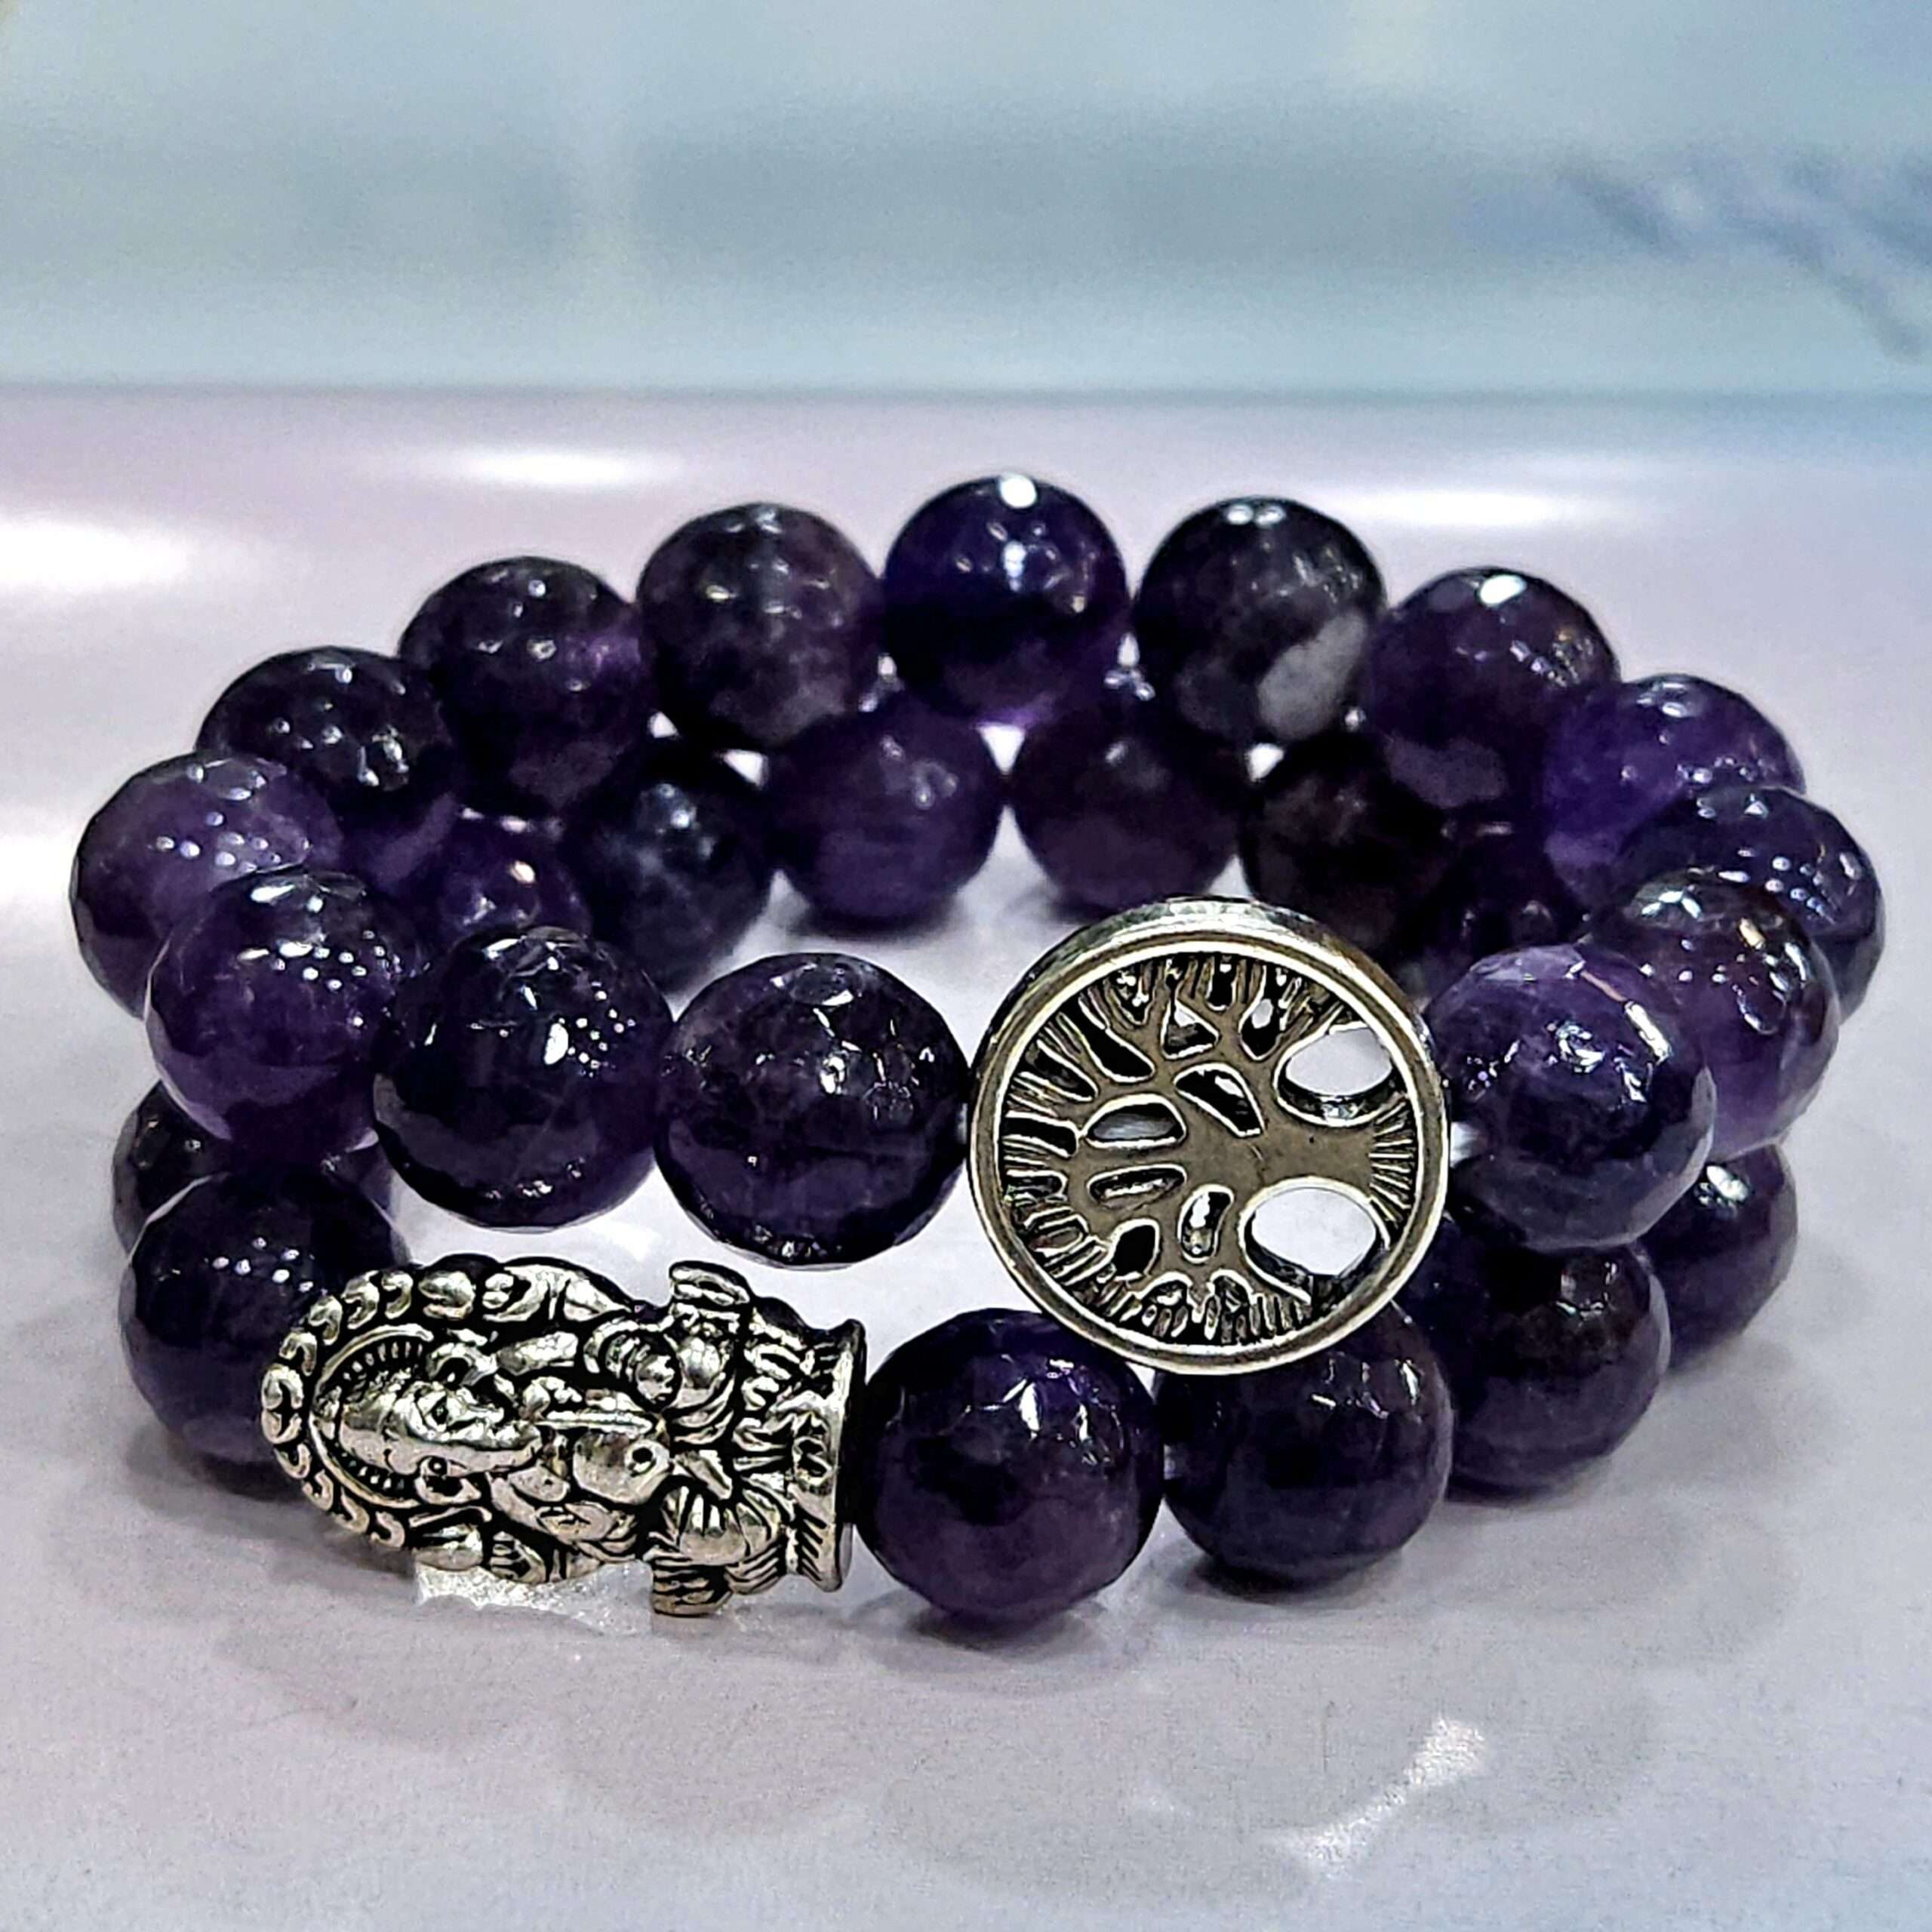 12mm bead bracelets, The best nature has to offer